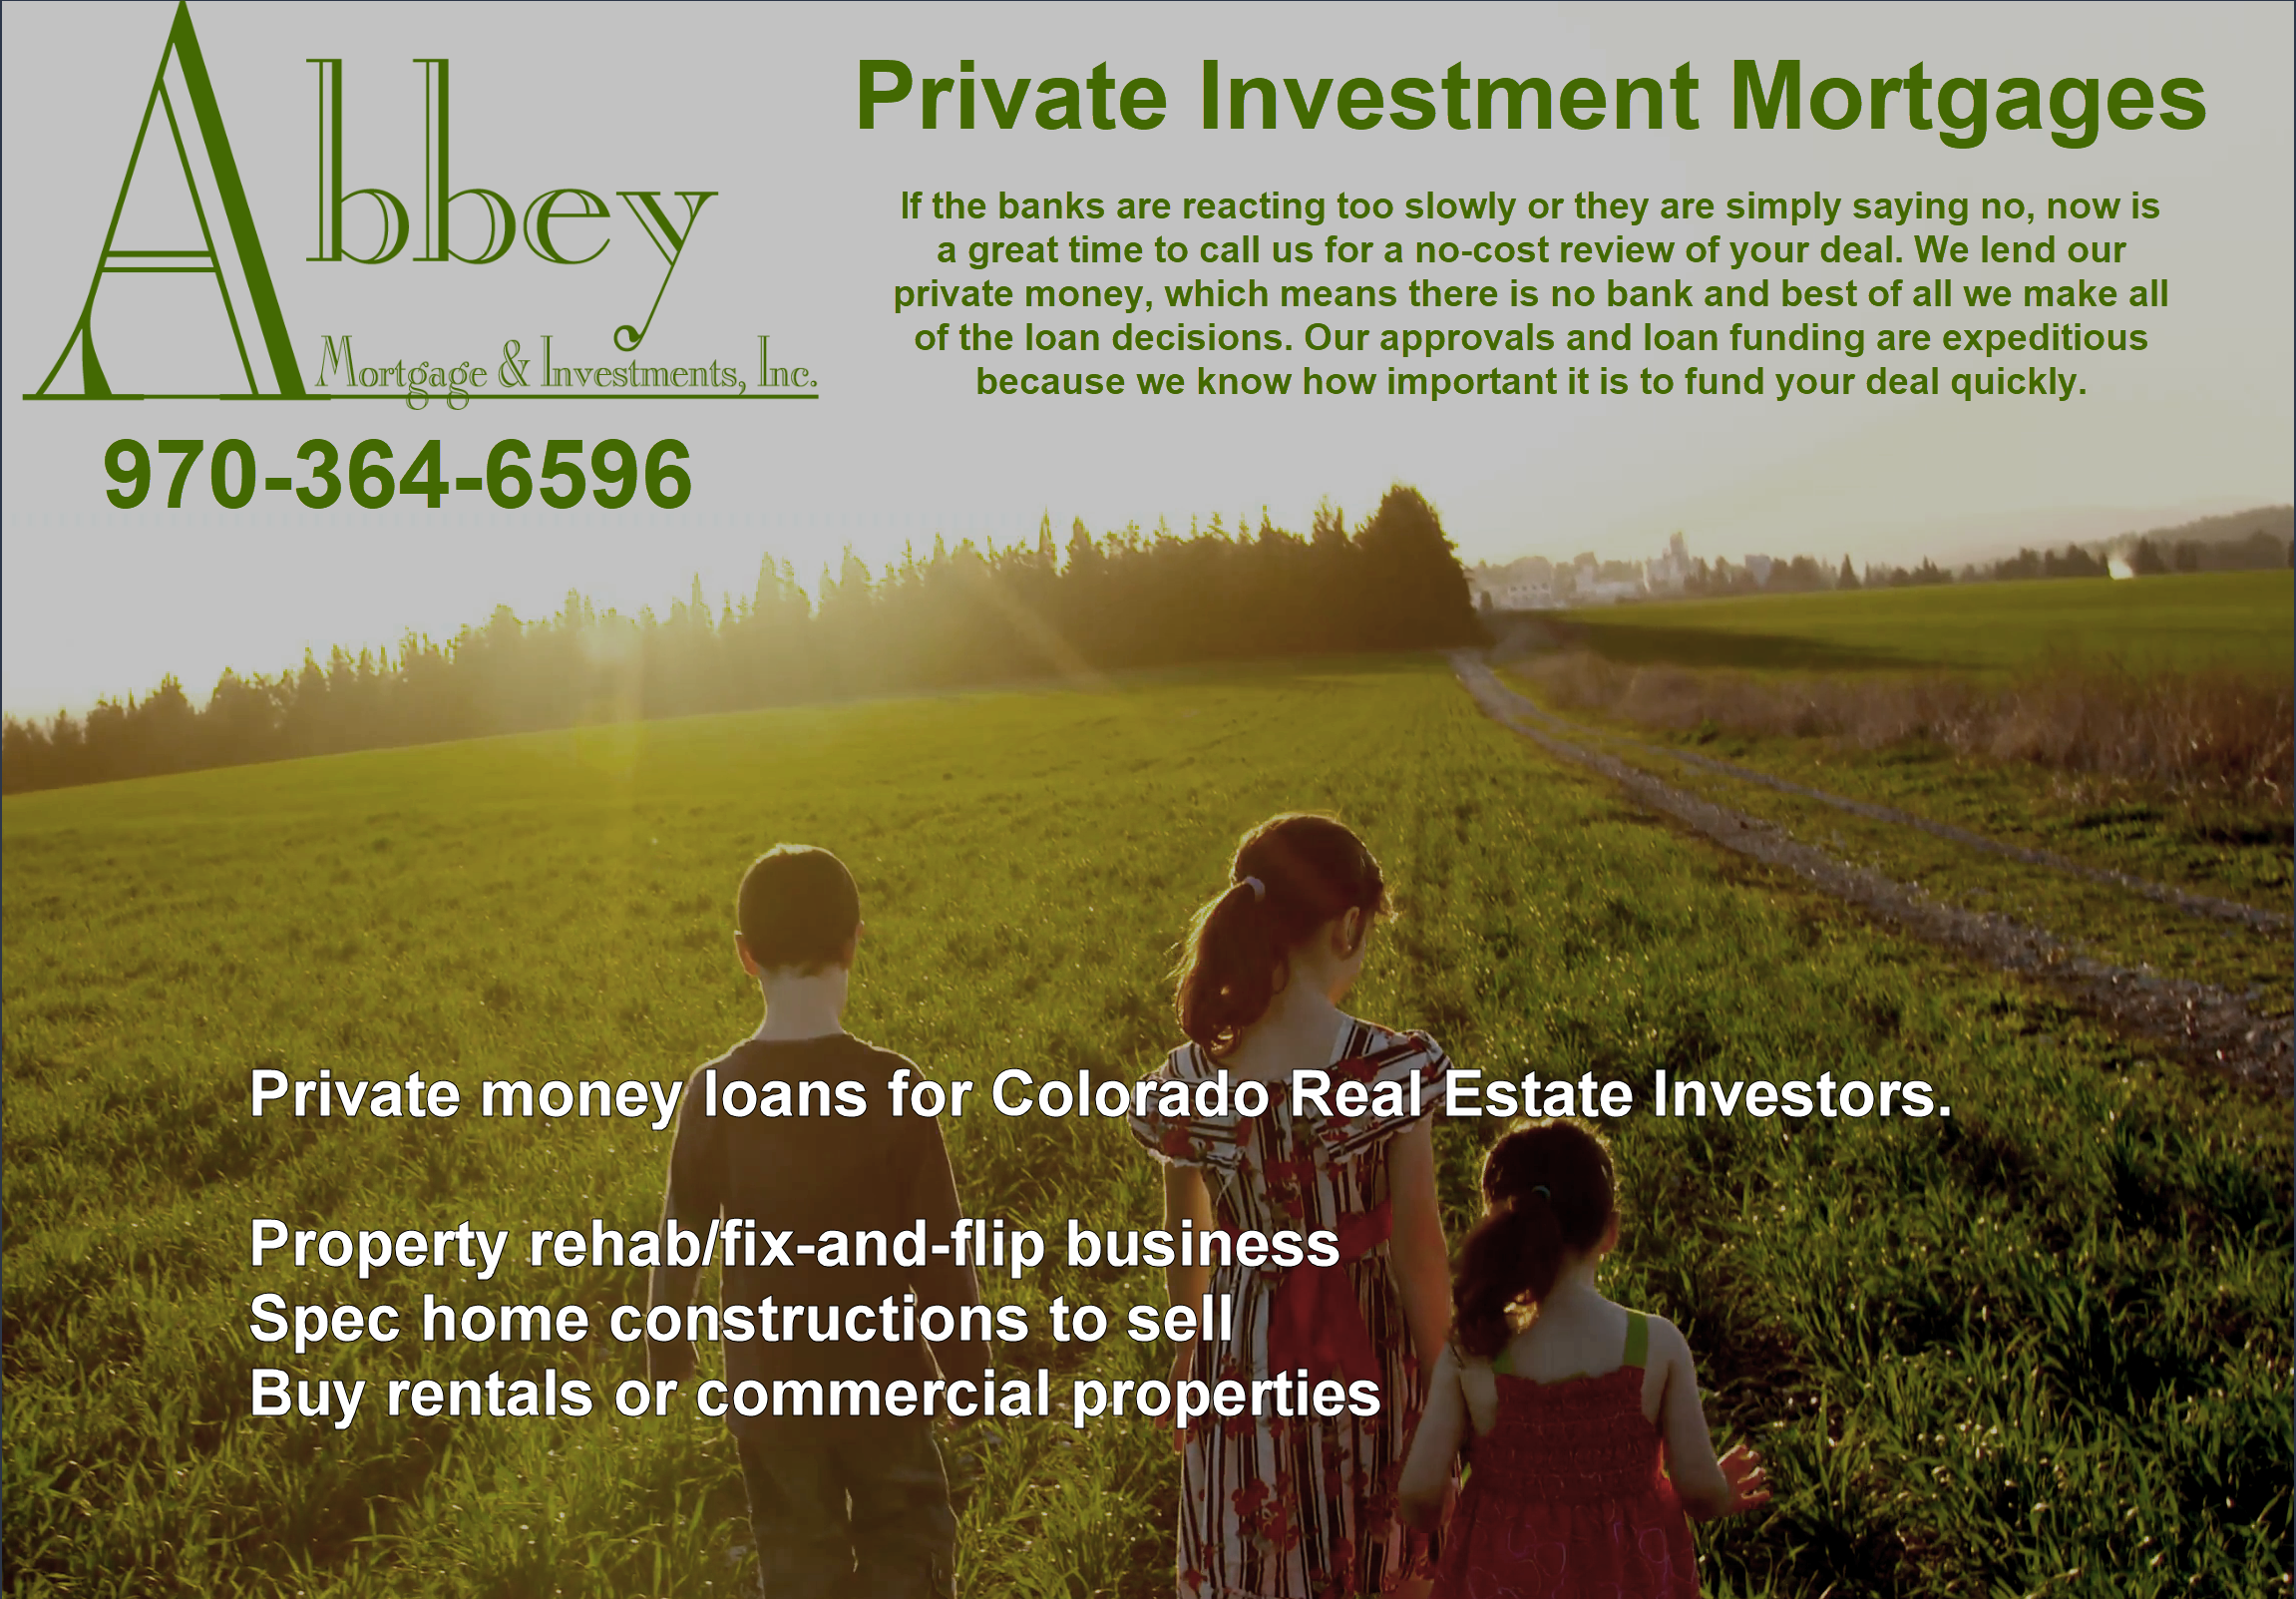 Abbey Mortgage and Investments Inc Photo